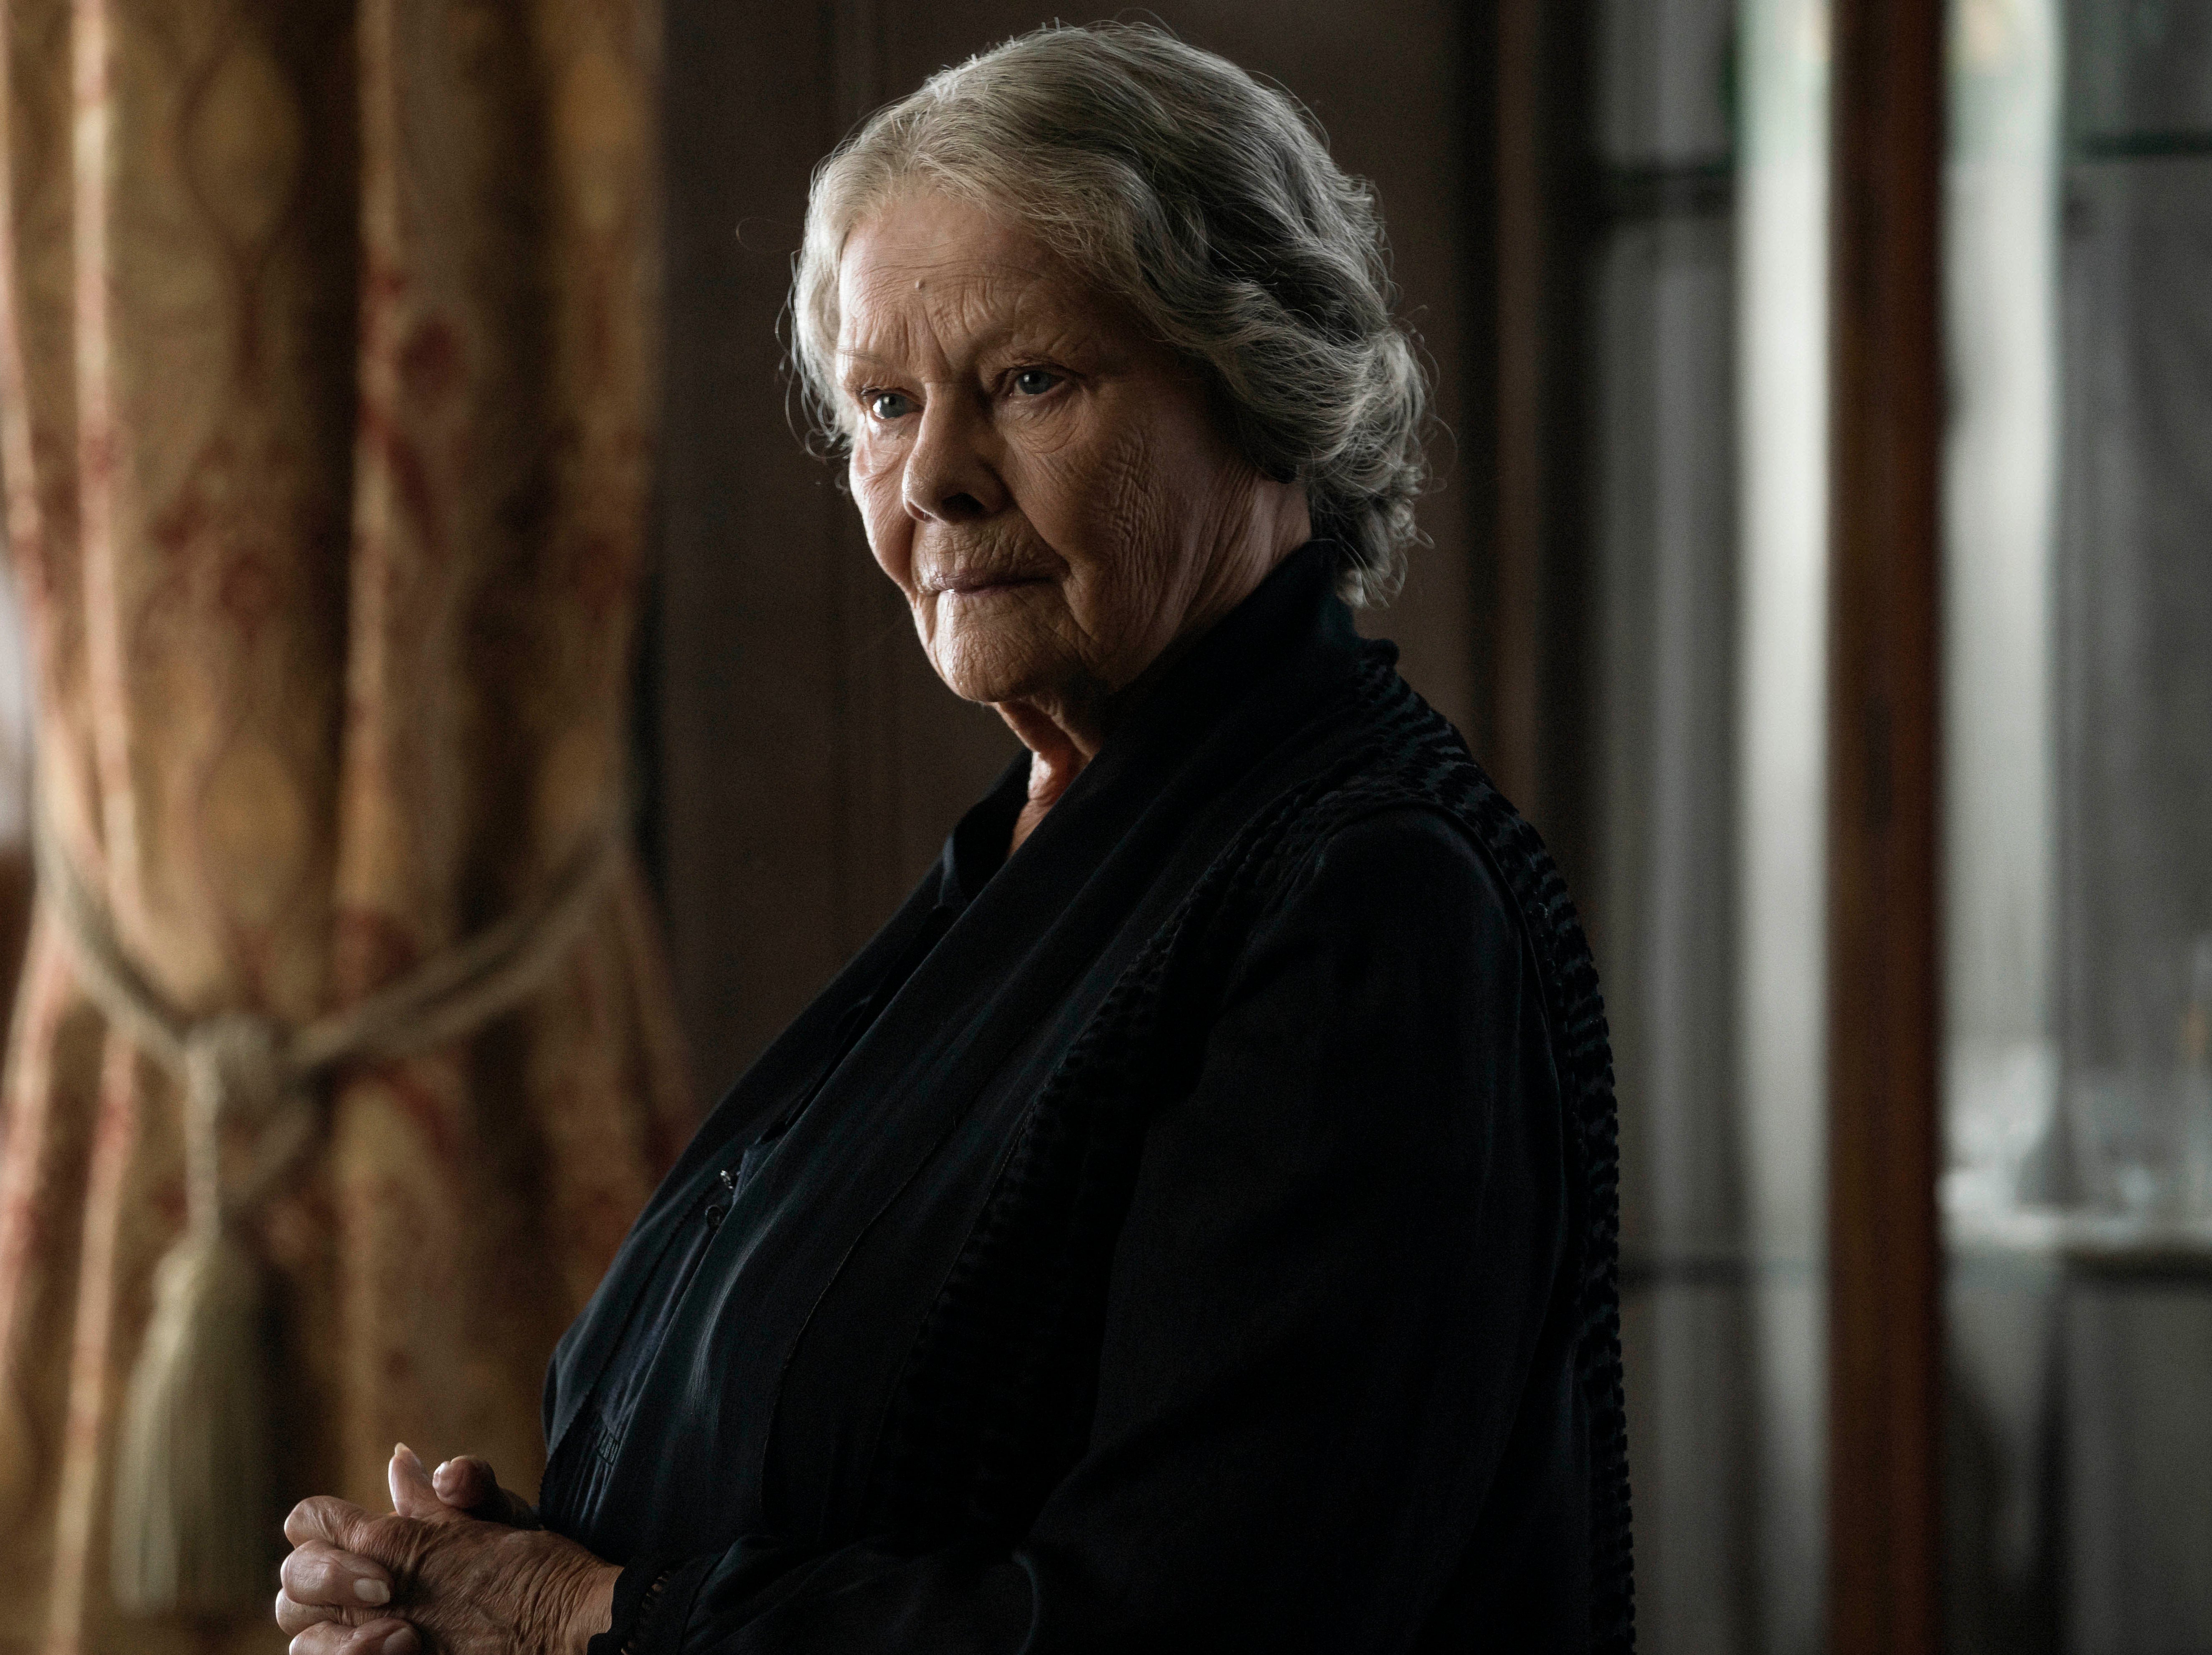 Judie Dench’s Miss Rocholl is never asked to confront her own complicity in the rise of Hitler’s regime